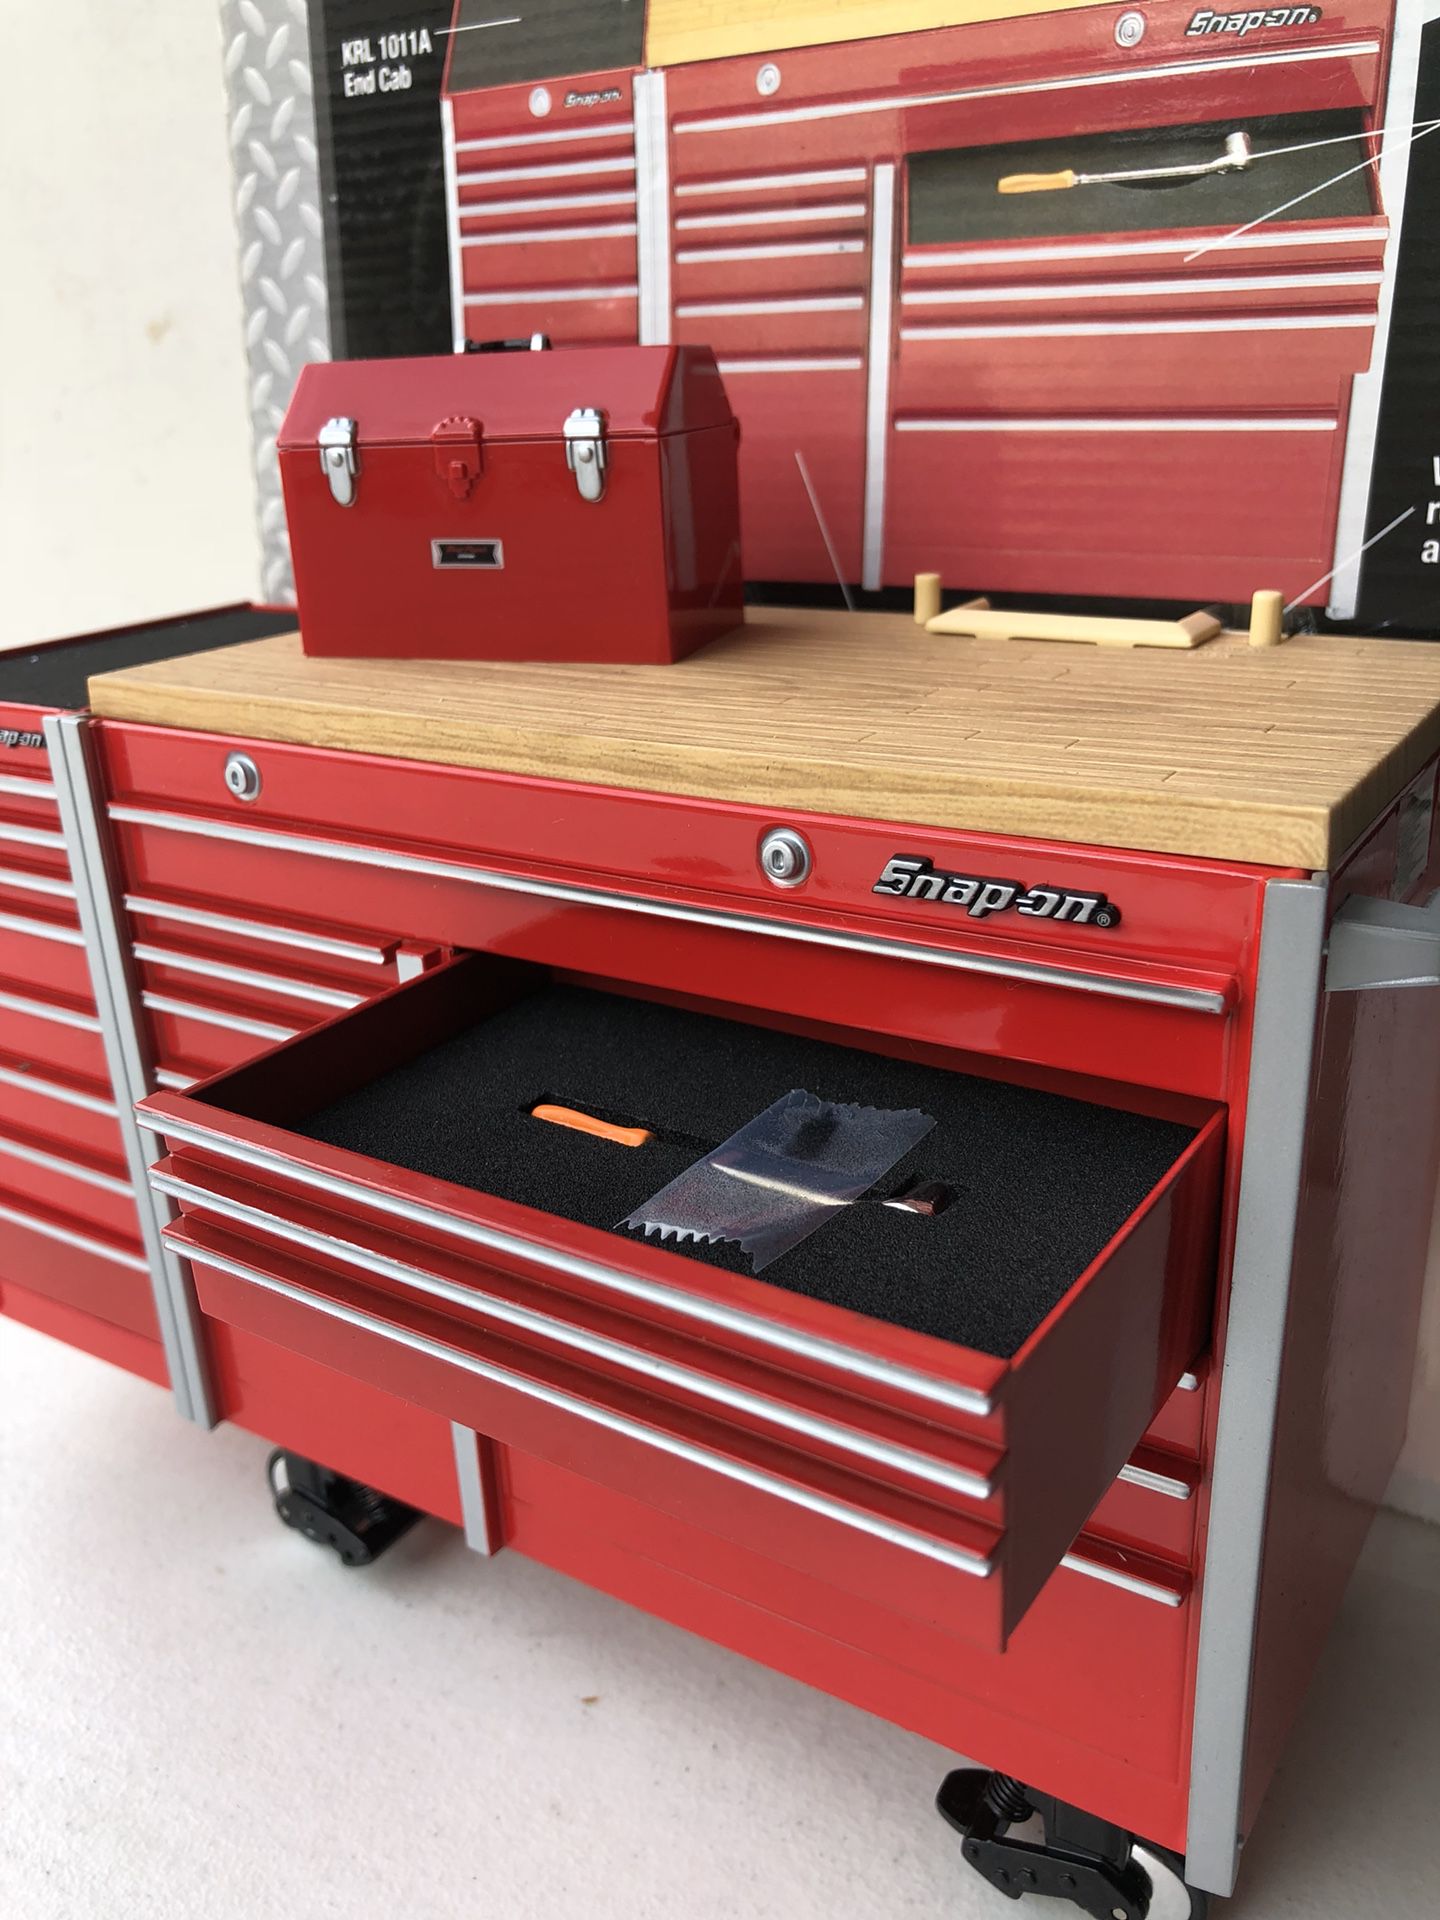 Snap On miniature toy tool chest! 1:8 scale (NOT A REAL TOOL CHEST!)